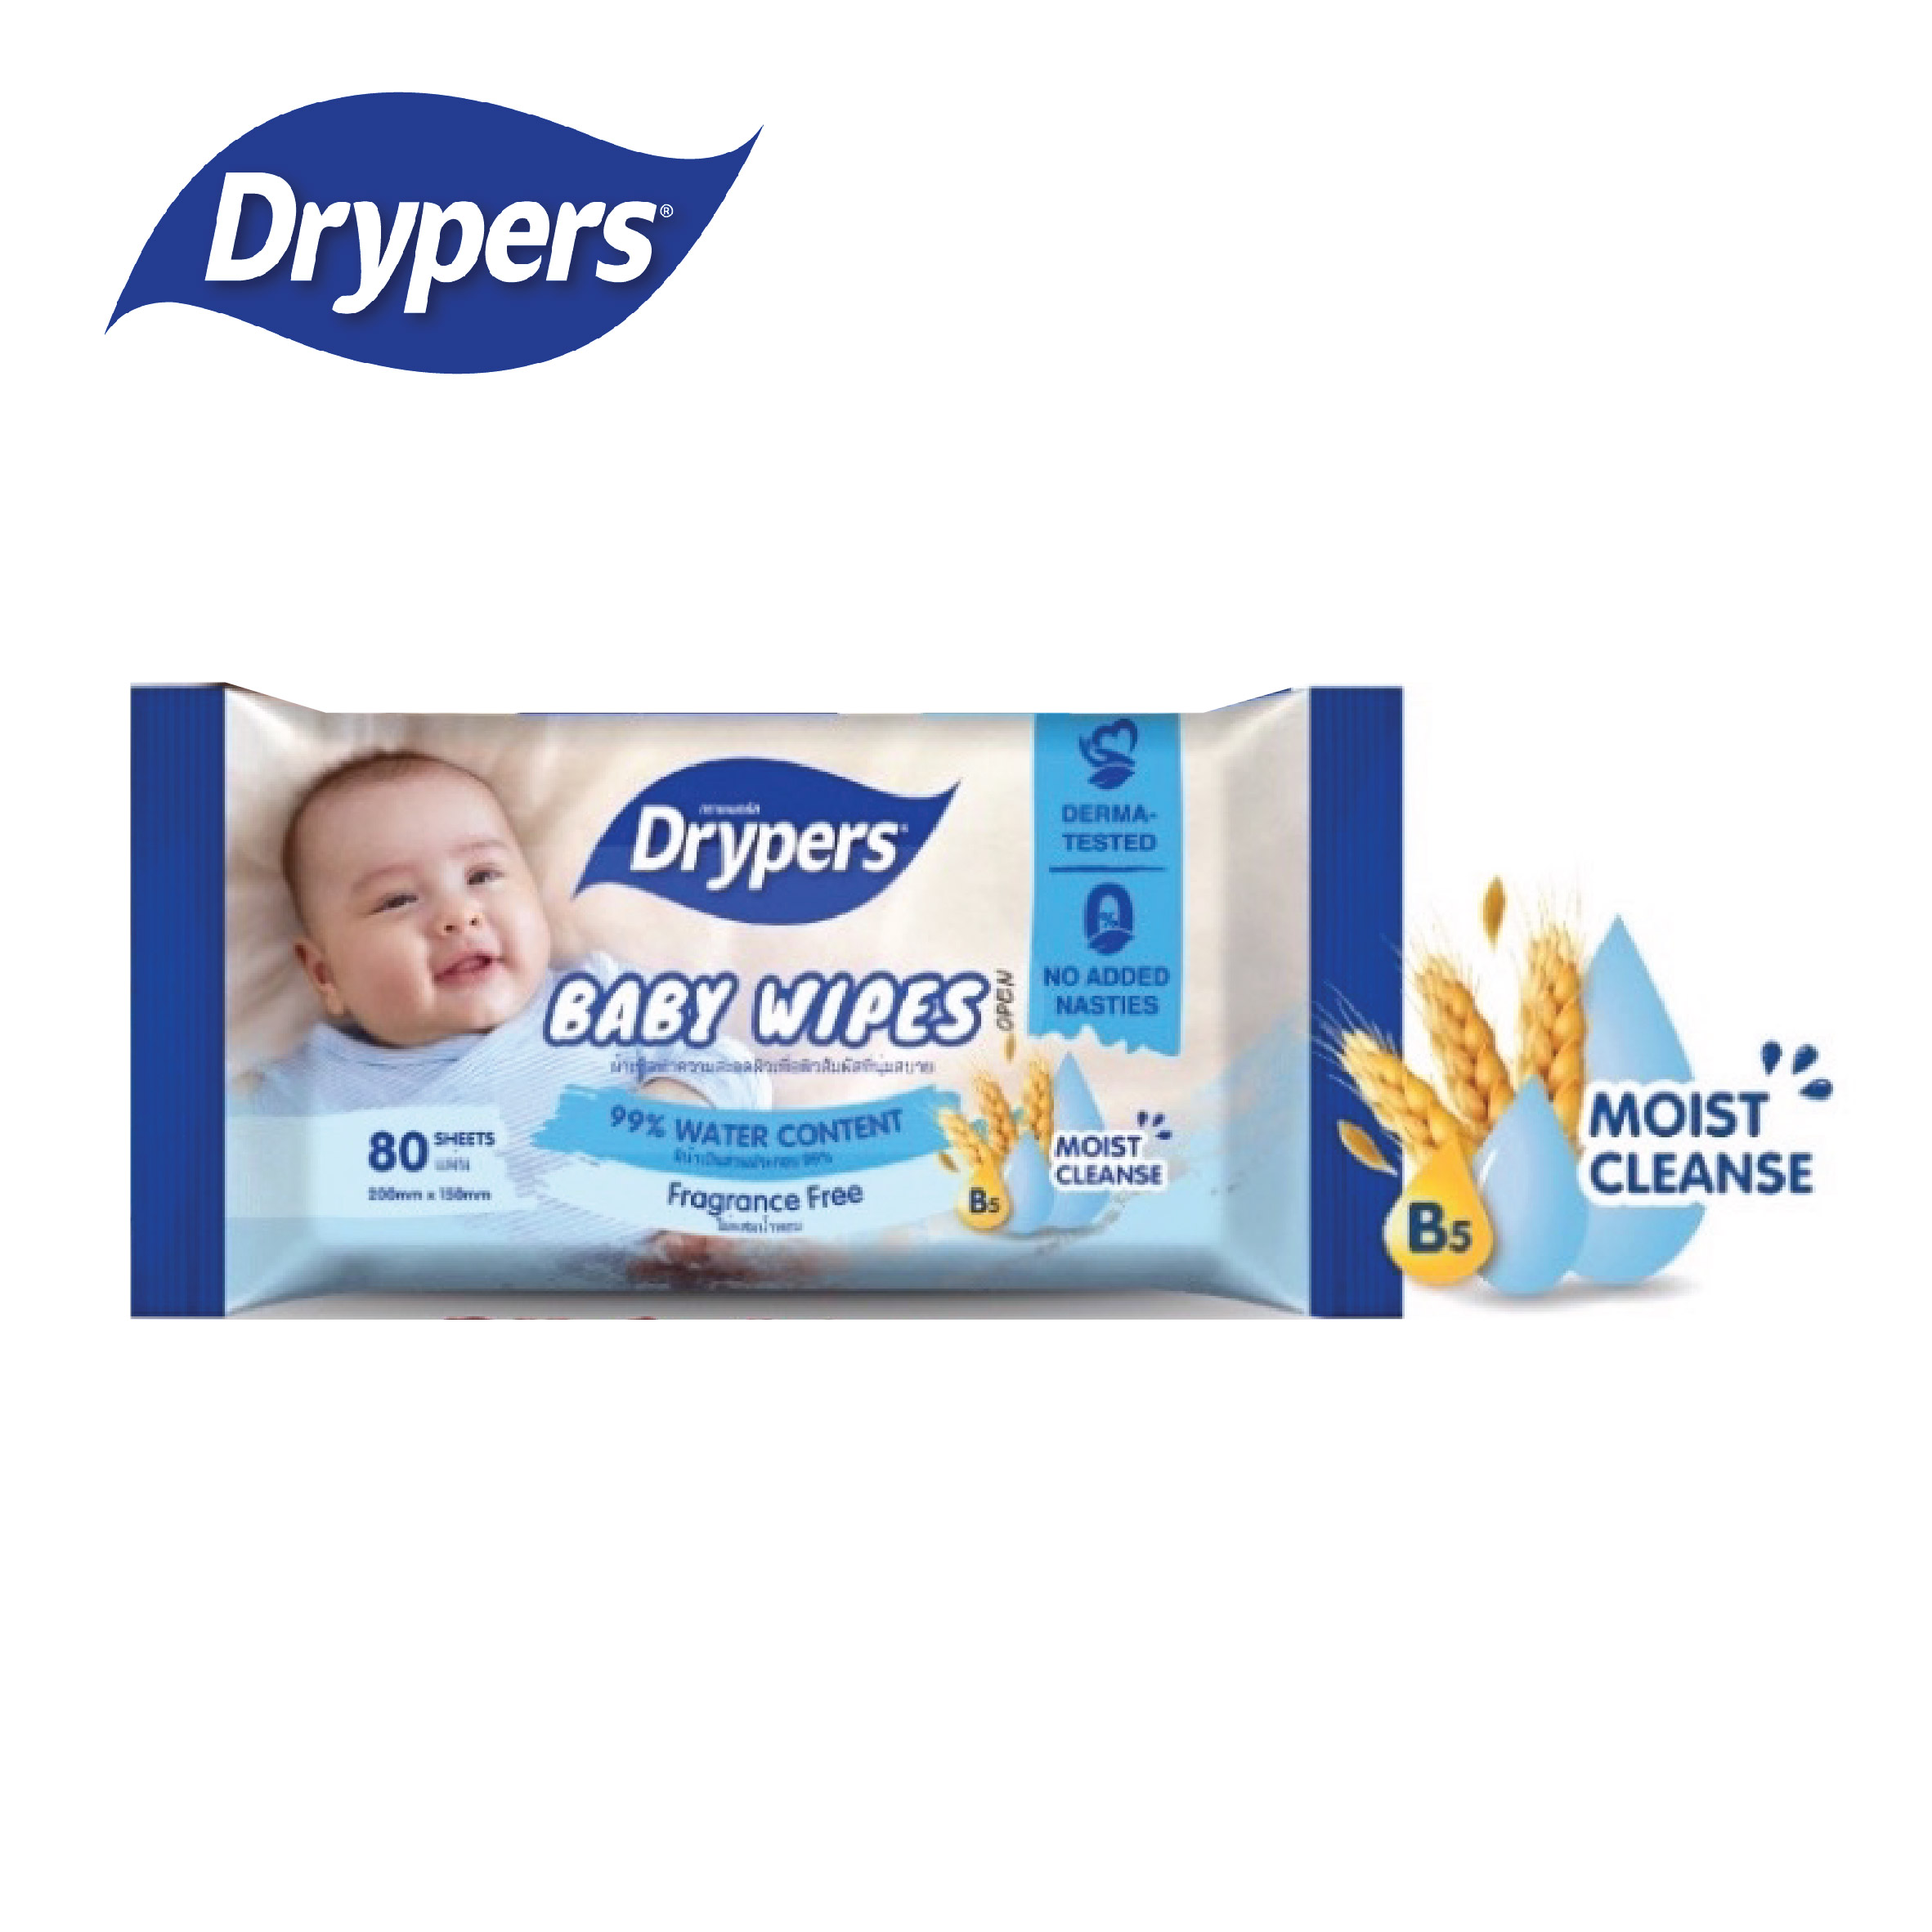 Drypers Fragrance Free Baby Wipes 80's